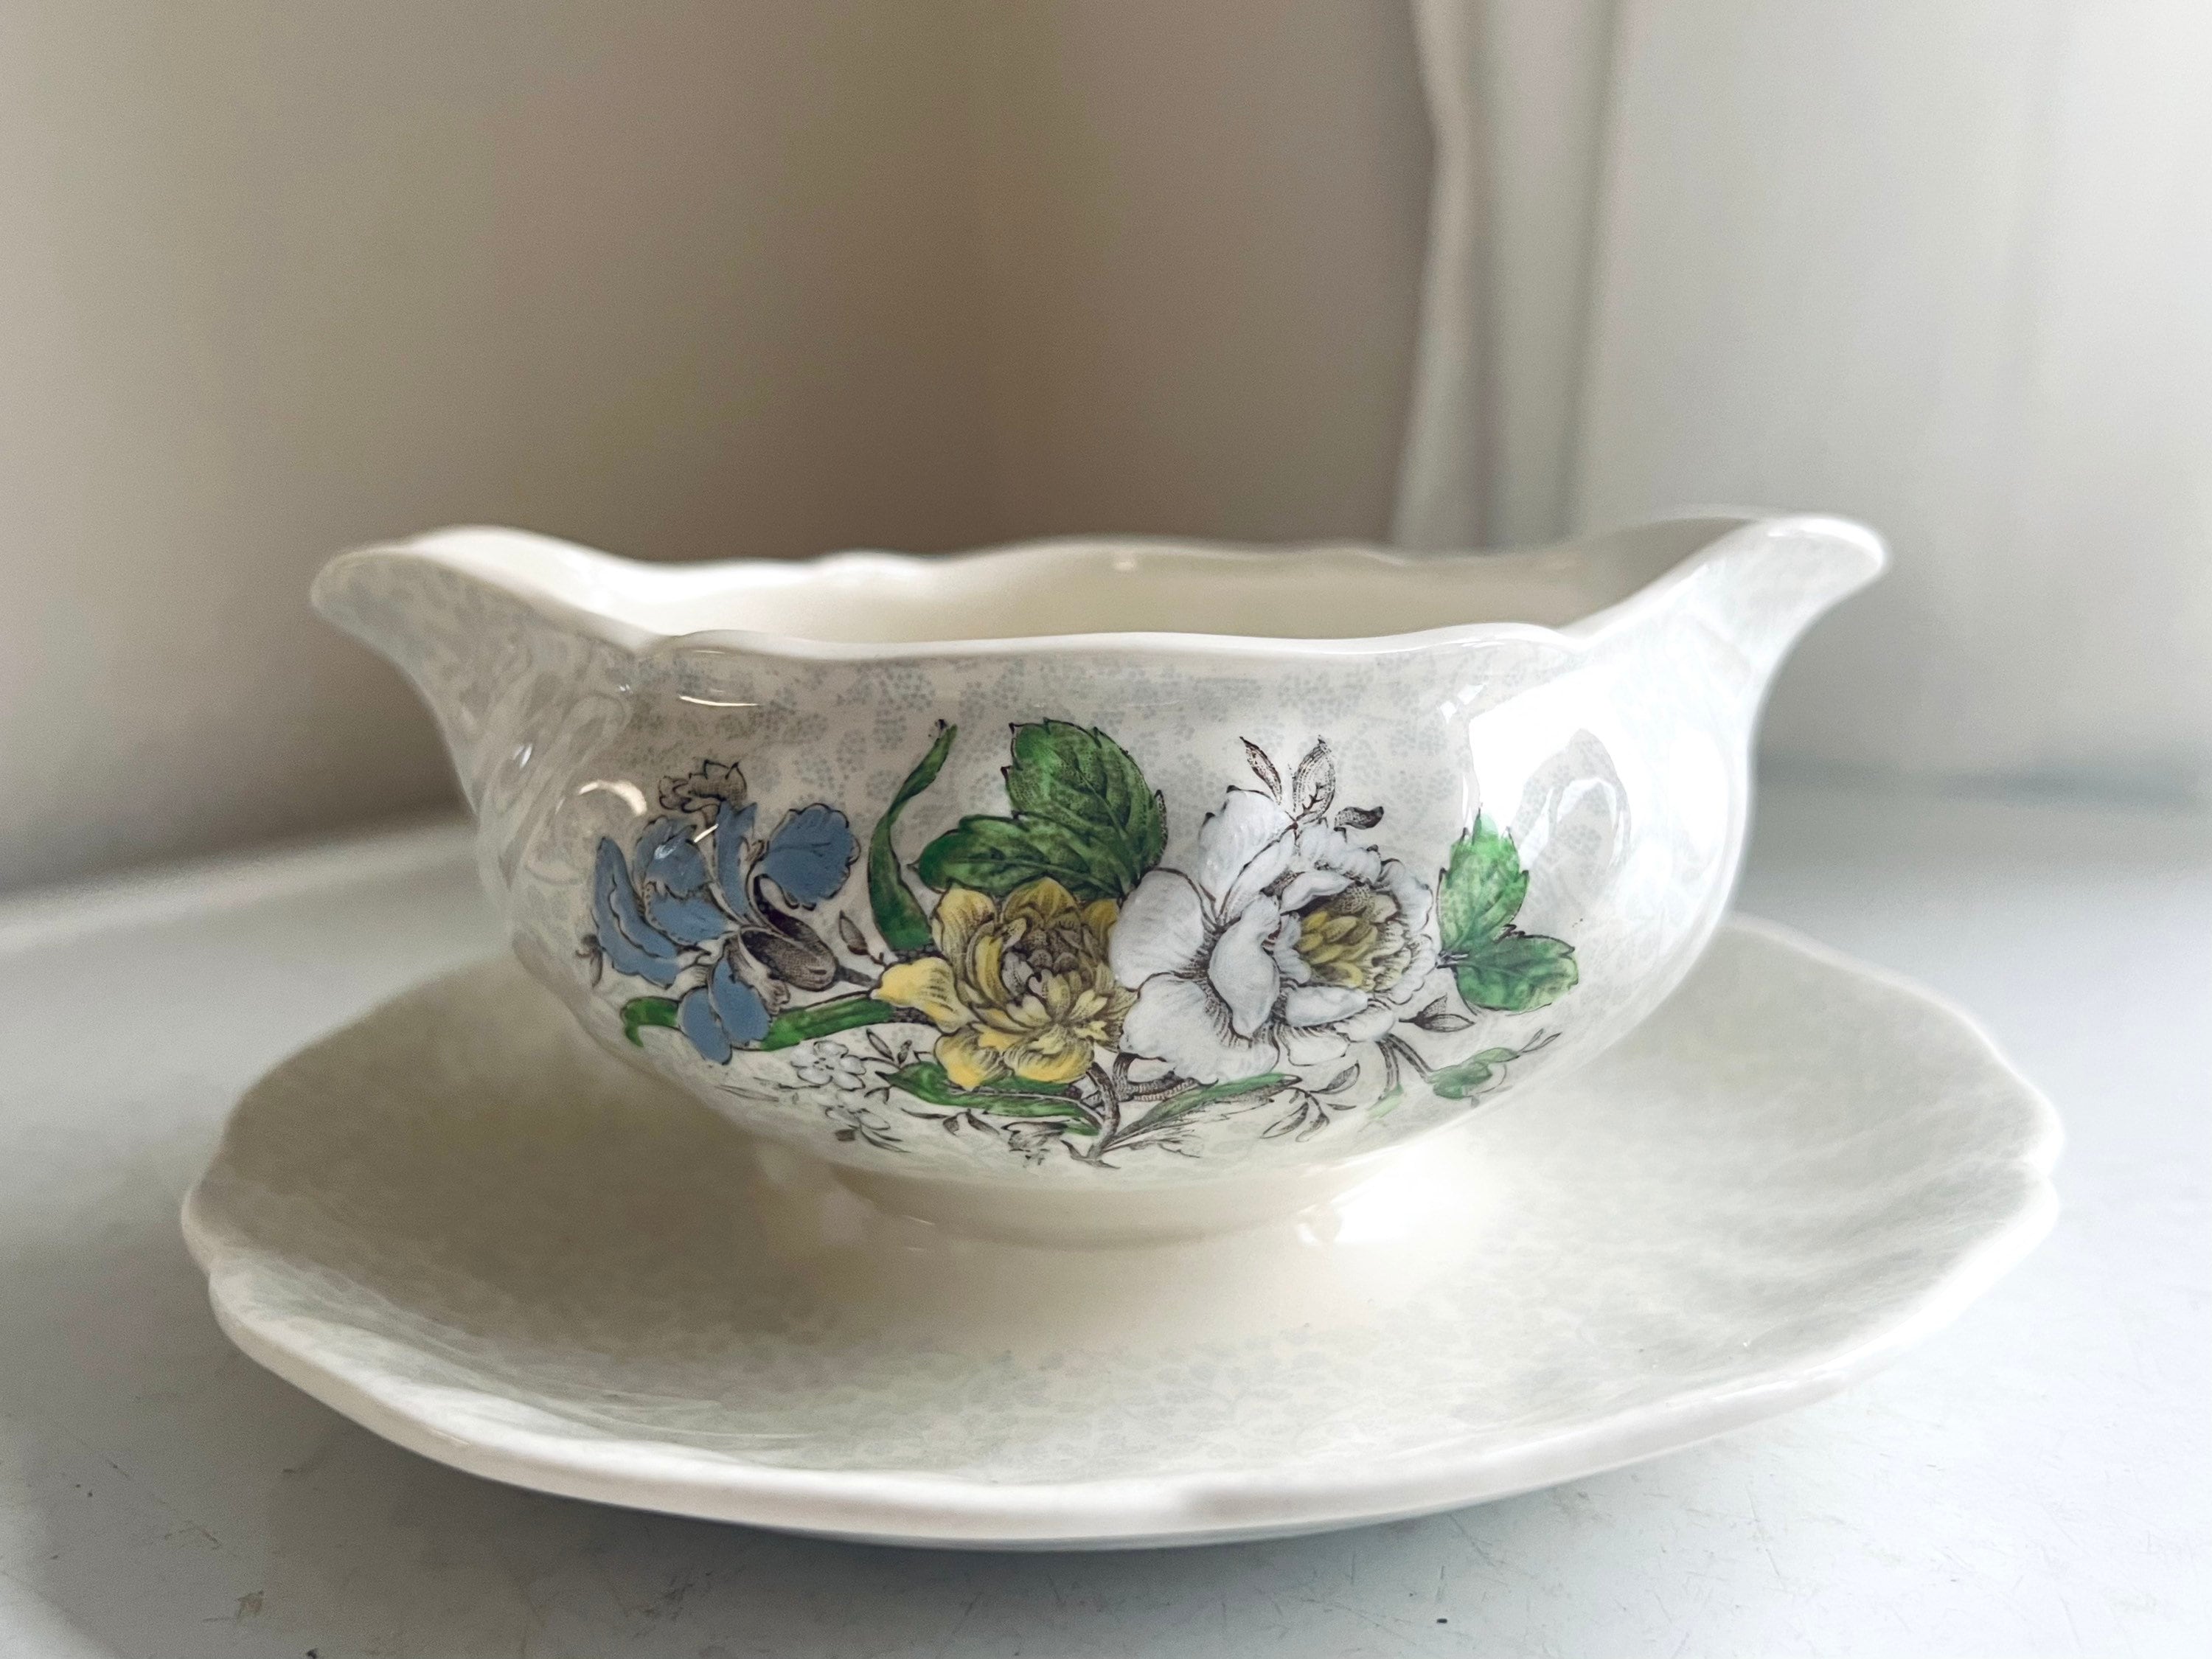 Vintage Sutherland By Royal Doulton Gravy Boat With Attached Underplate ~ Made In England 1950's ~ Sutherland Gravy ~ Sutherland Sauce Bowl